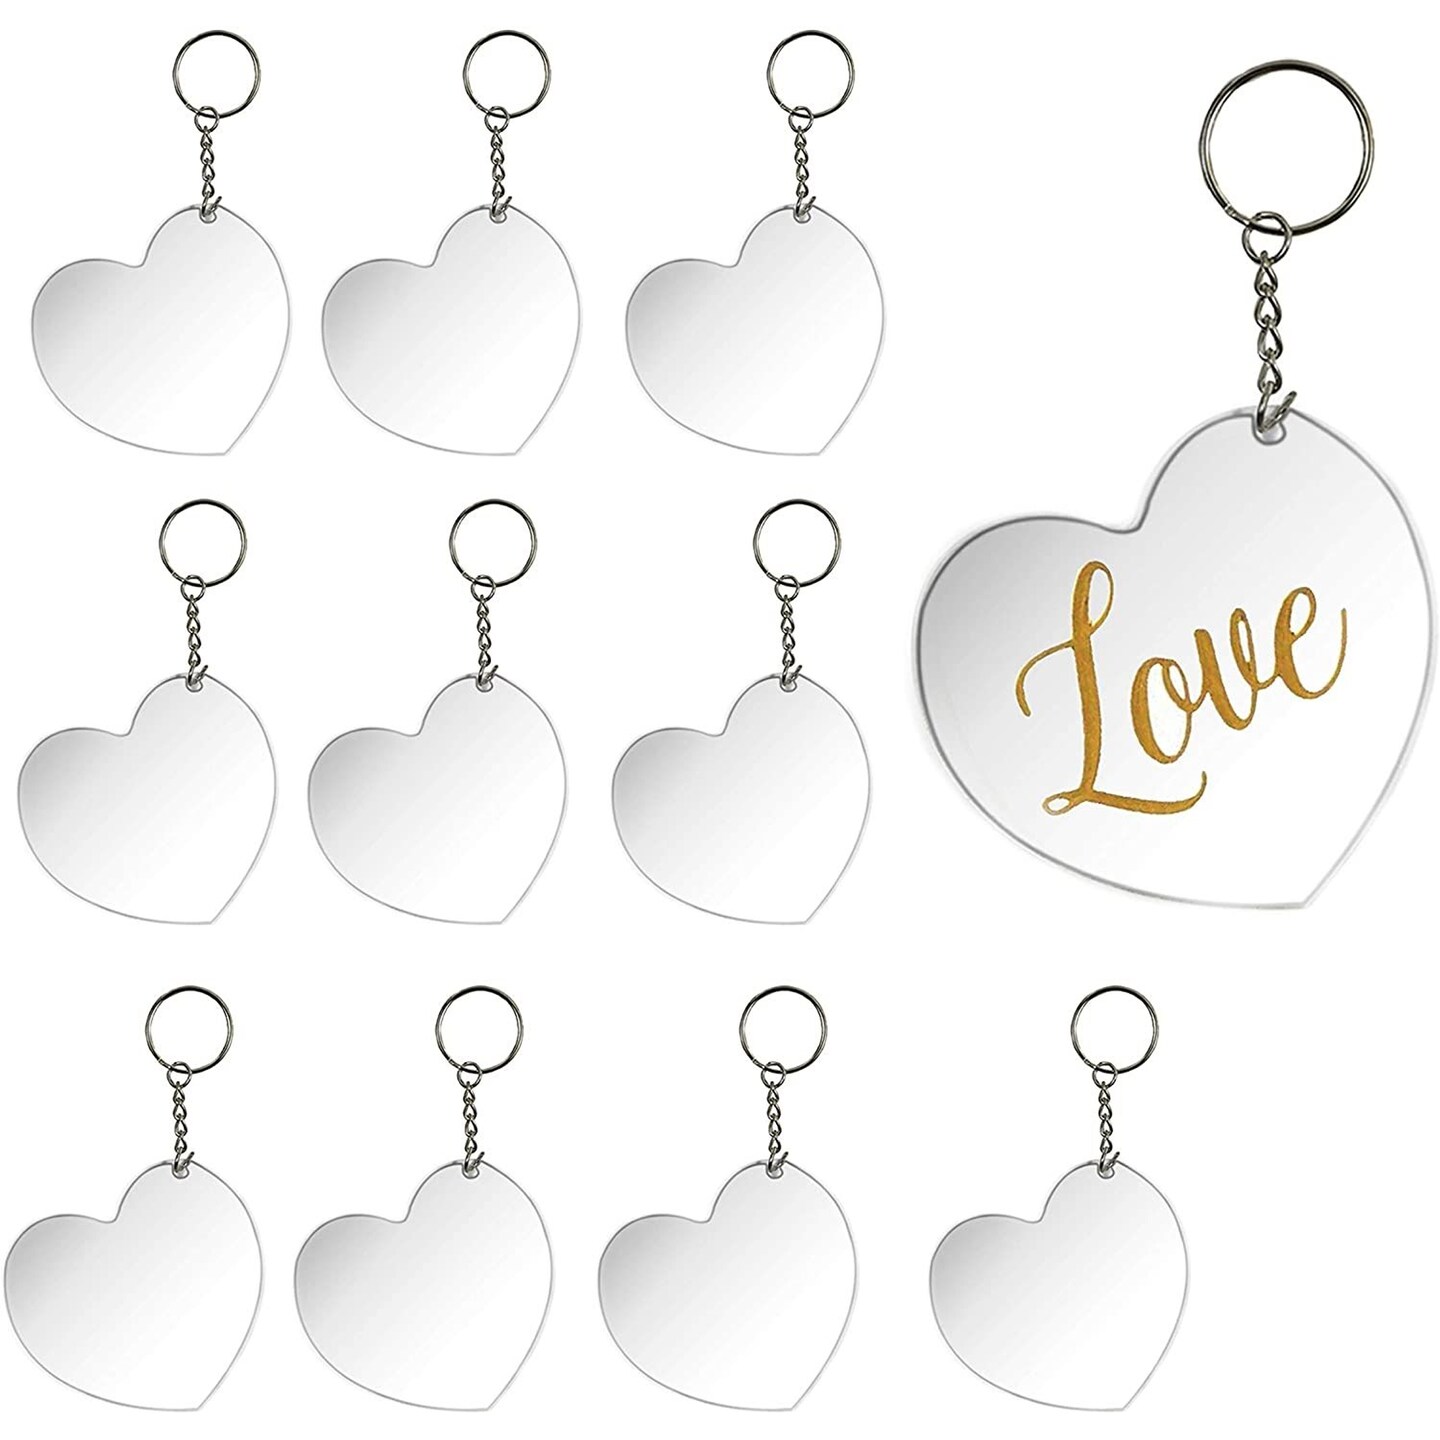 Acrylic Heart Keychain Blanks with Metal Rings for DIY Crafts (3x2.75 In,  10 Pack)